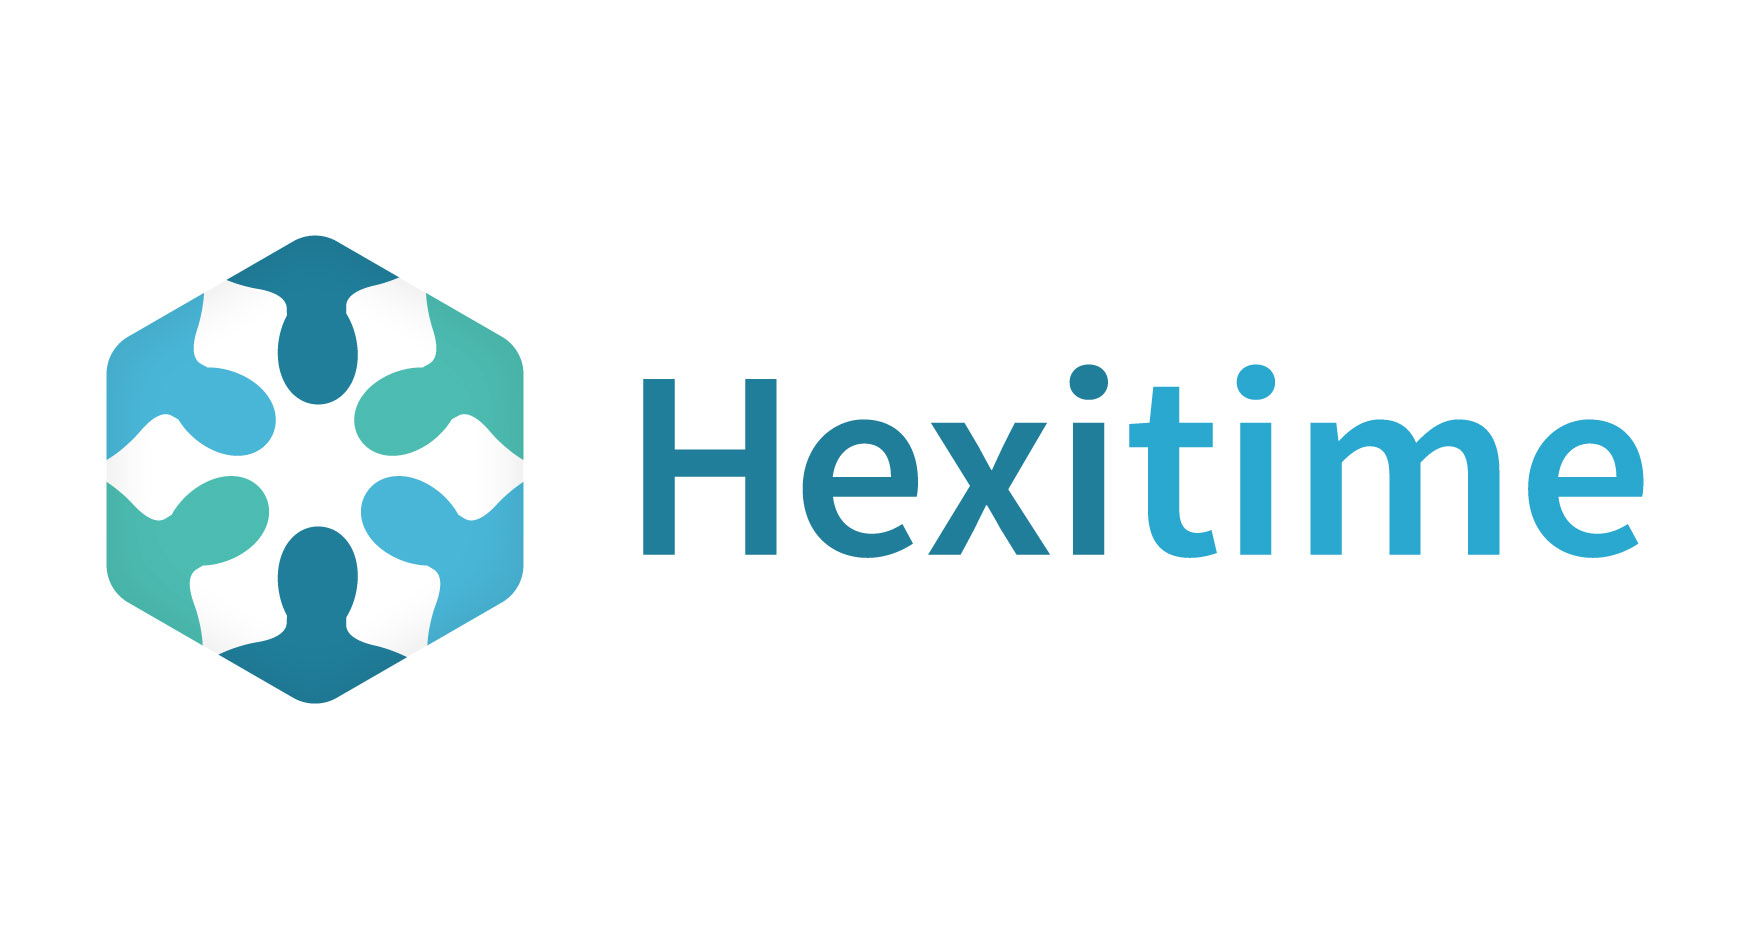 Hexitime - The Timebank for Improving Health and Care featured image